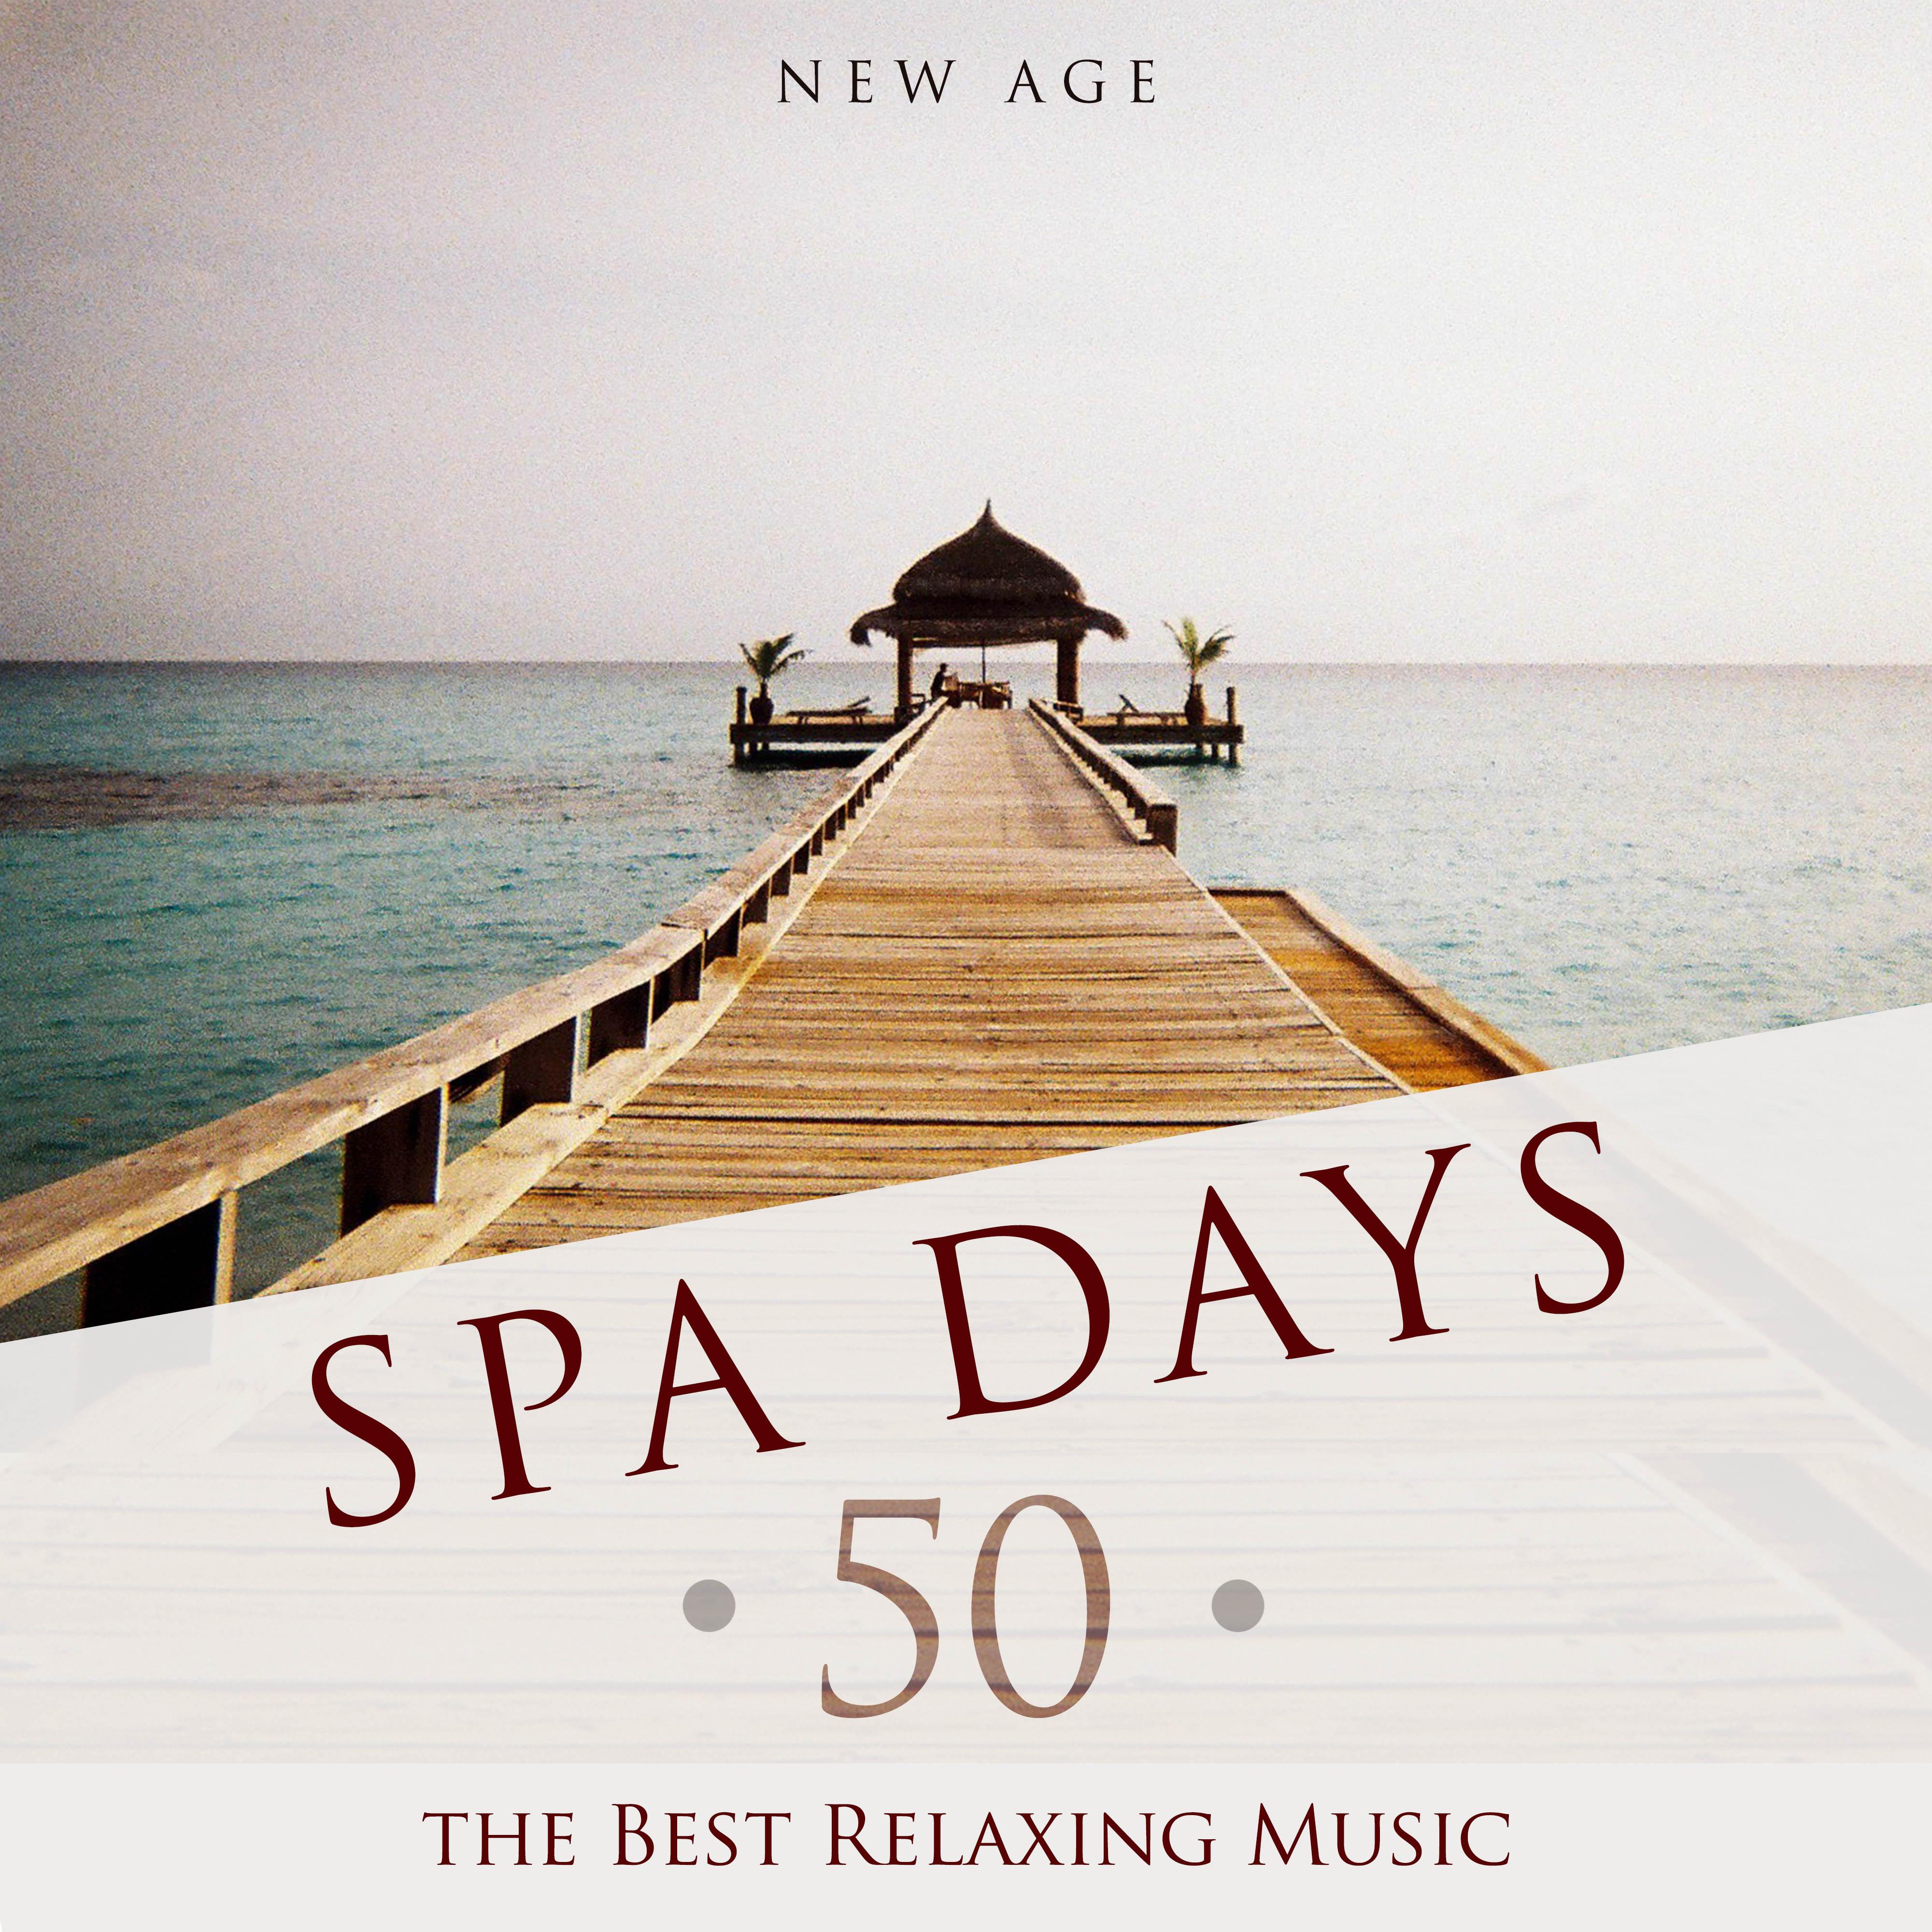 Spa Days - Enjoy Bathing in the Warm Thermal Waters with the Best Relaxing Music for Spas coupled with the Soothing Sounds of Nature